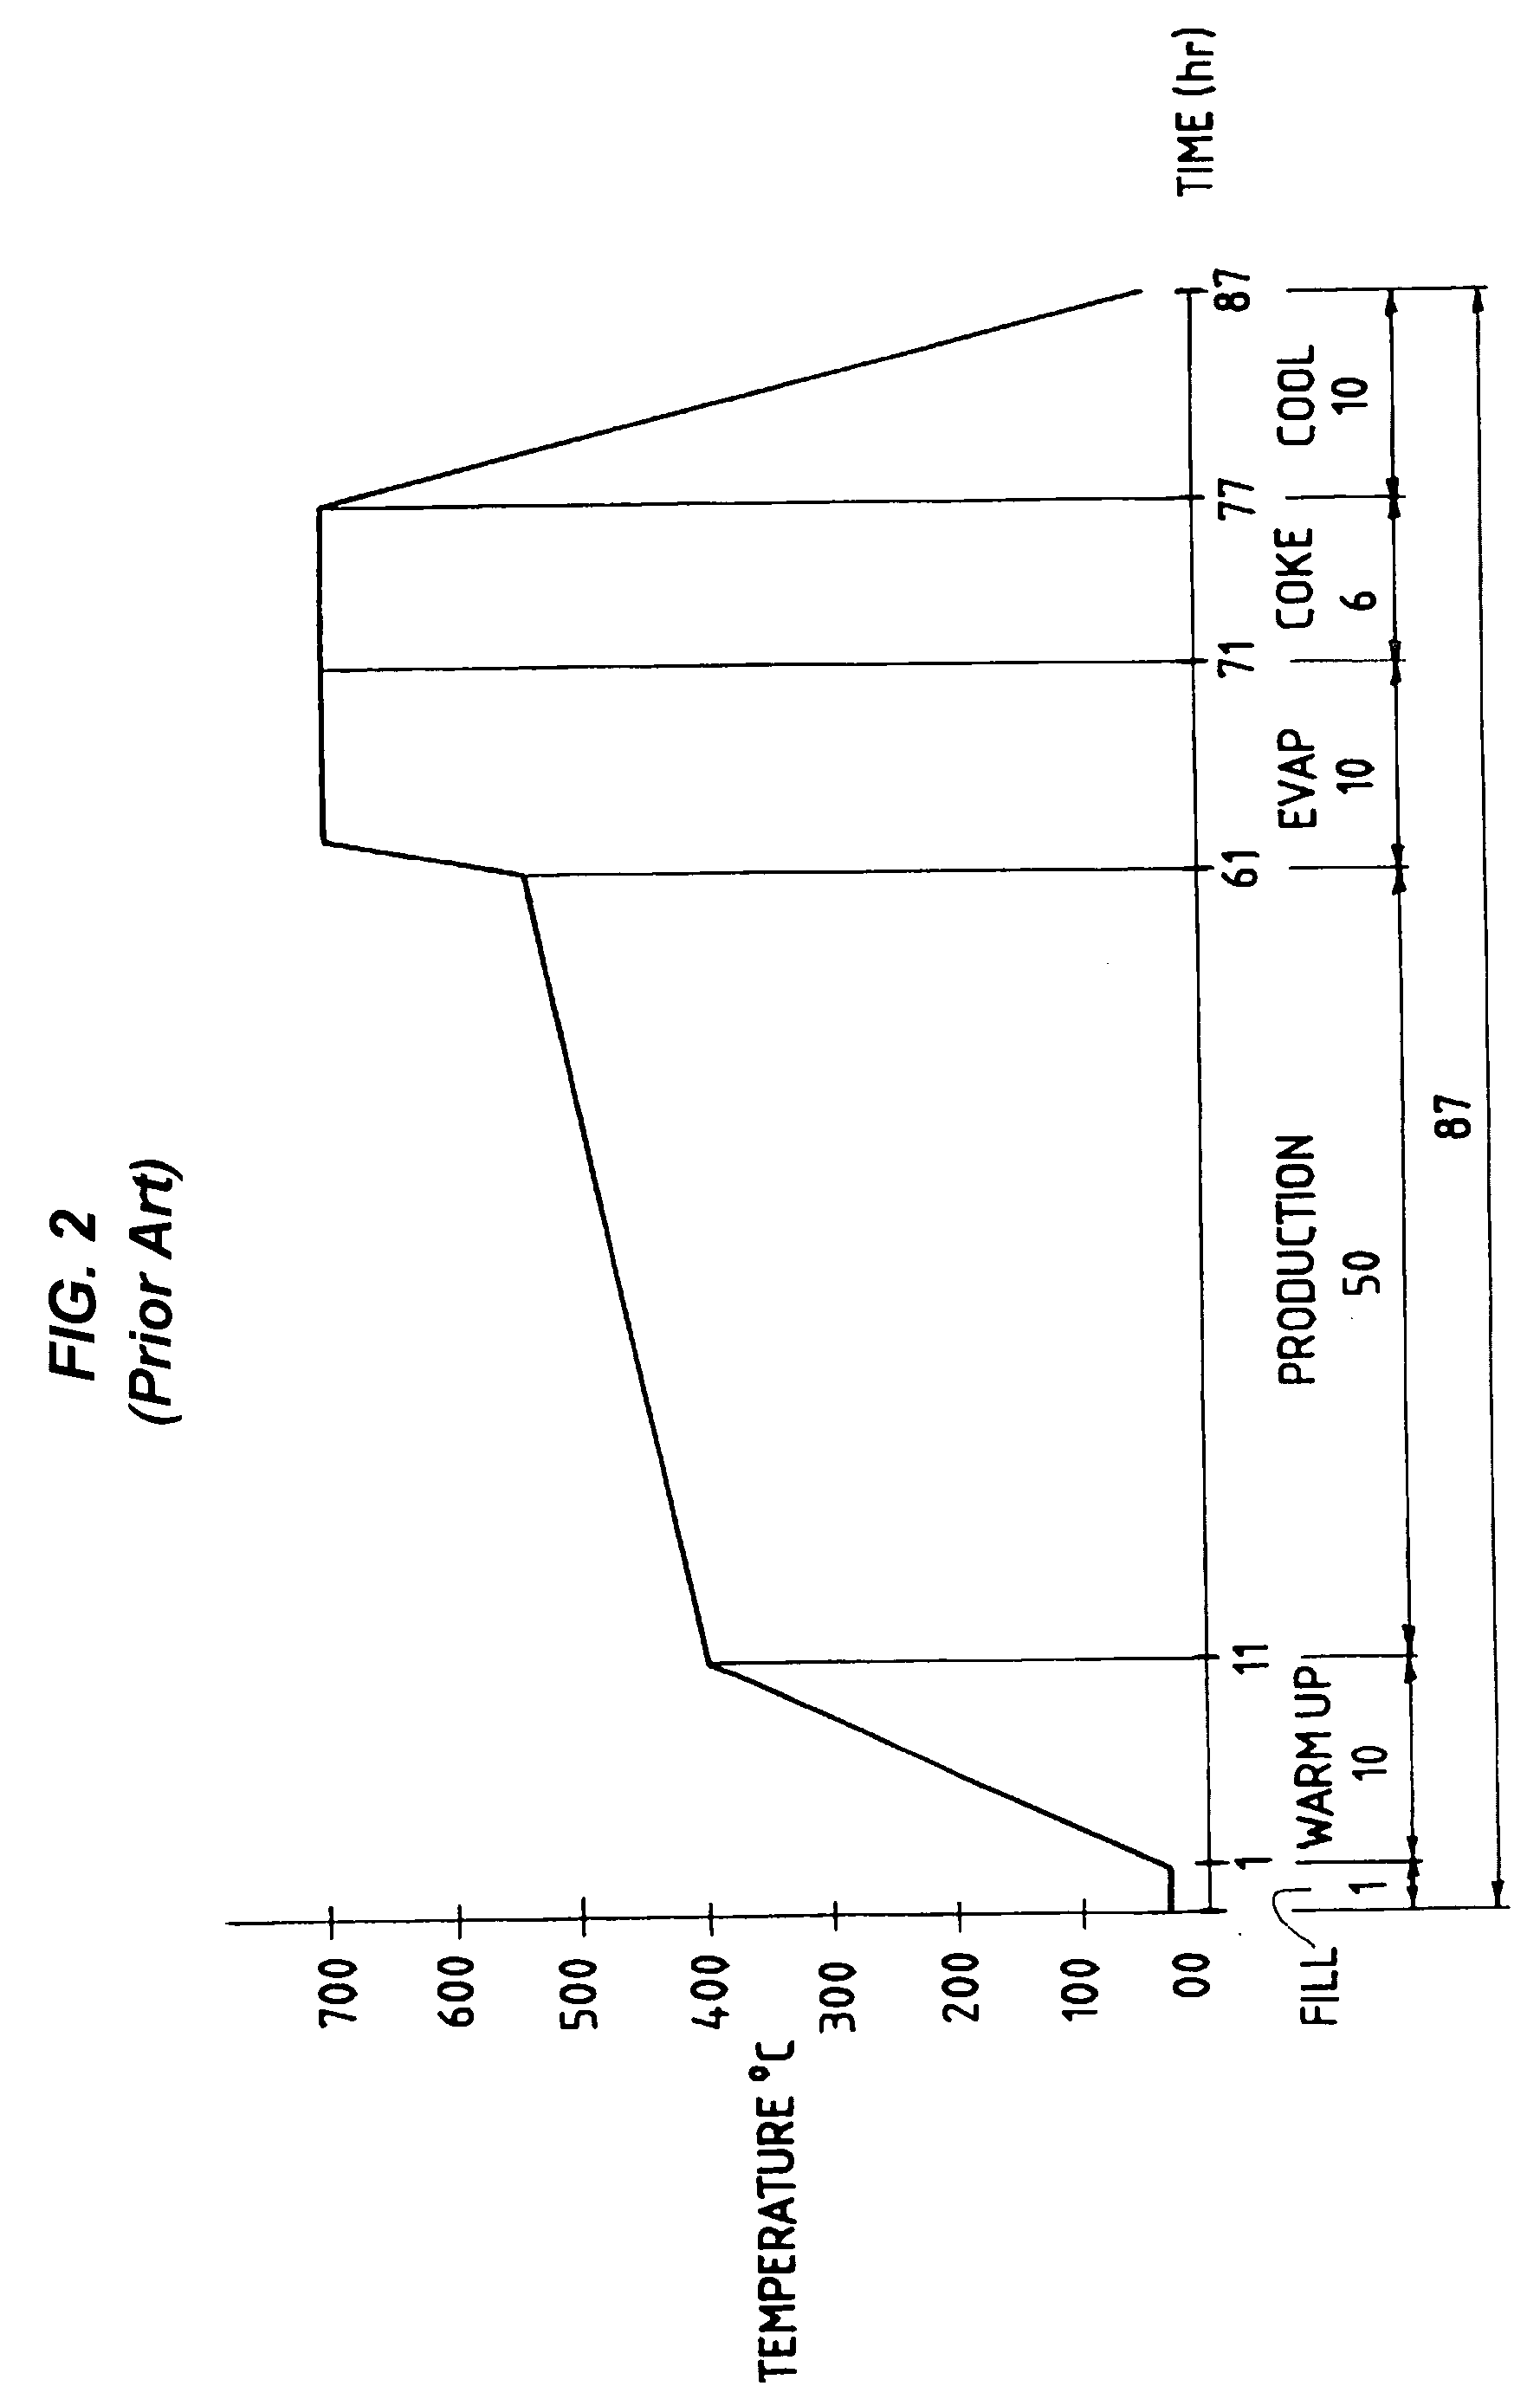 Apparatus and process for treatment of waste oils